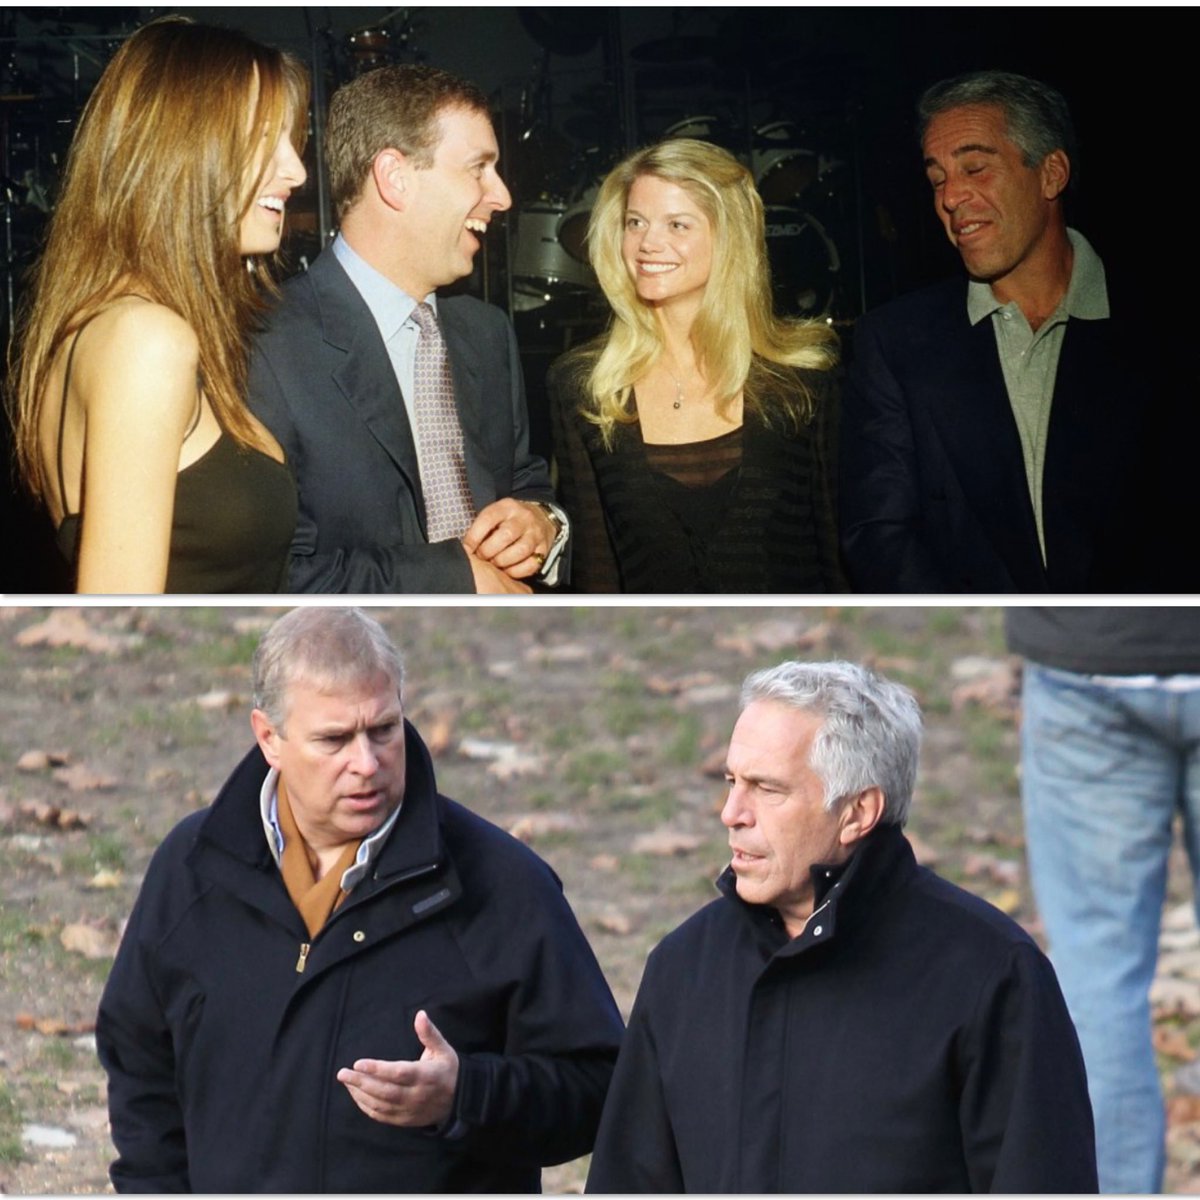 The MAXWELLS and the WINDSORS: two families joined at the hip for more than 50 years...

#EpsteinIsland #PedoIsland #WEFAgenda2030 #NathanWolfe